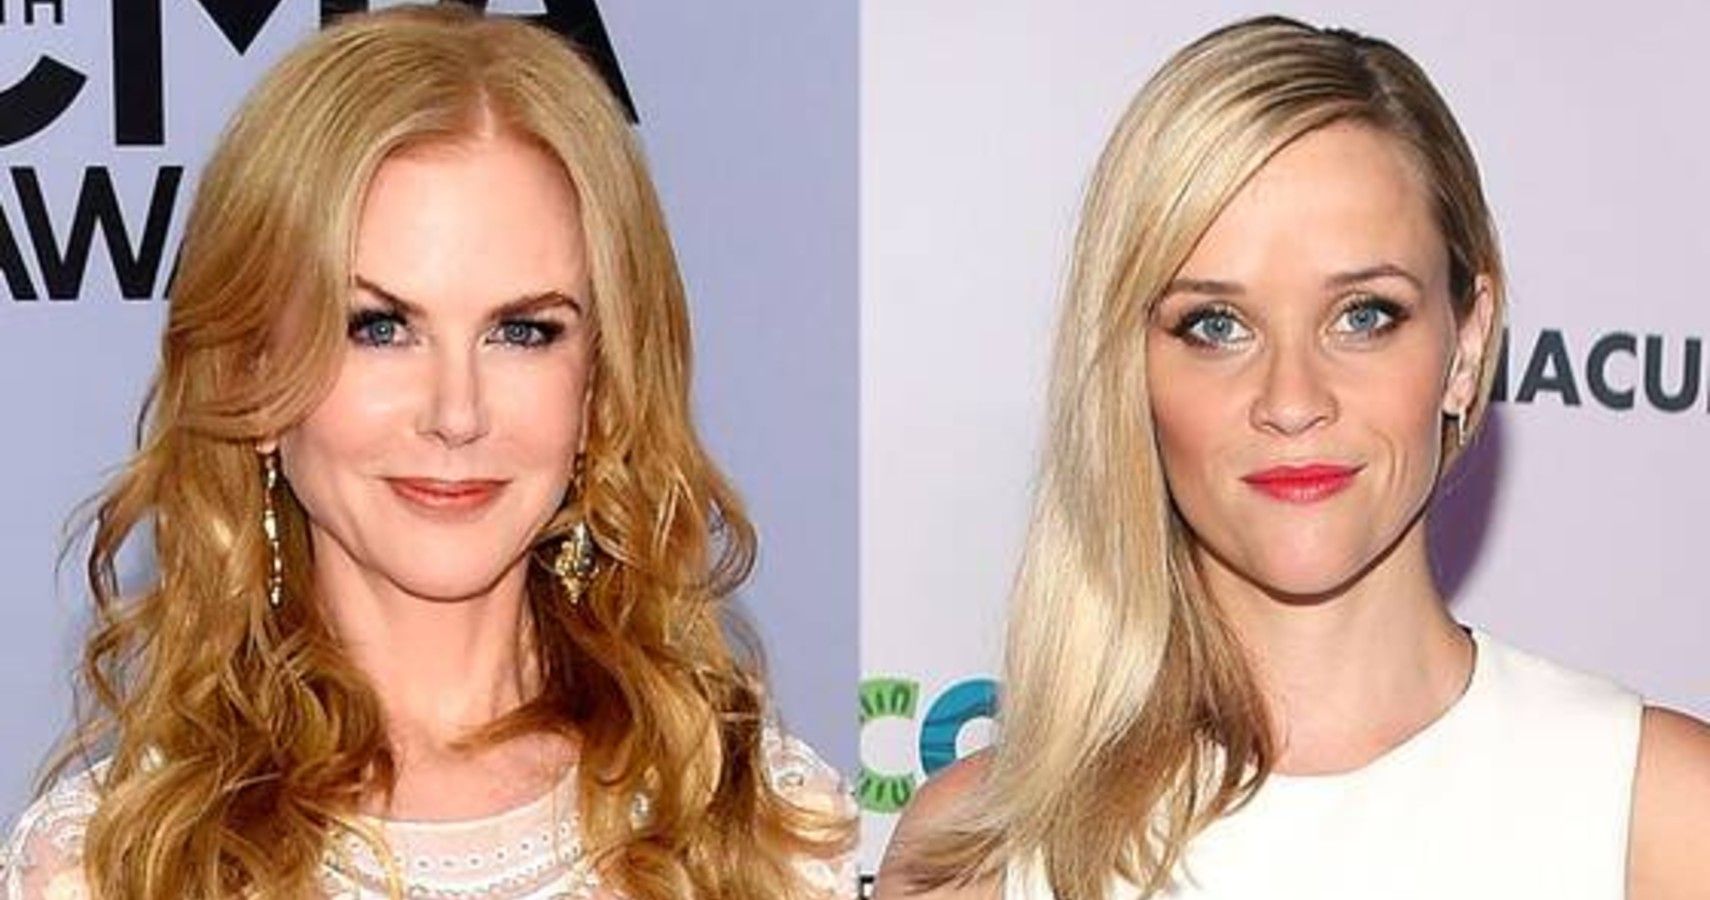 Nicole Kidman Dishes on Producing 'Big Little Lies' With Reese Witherspoon